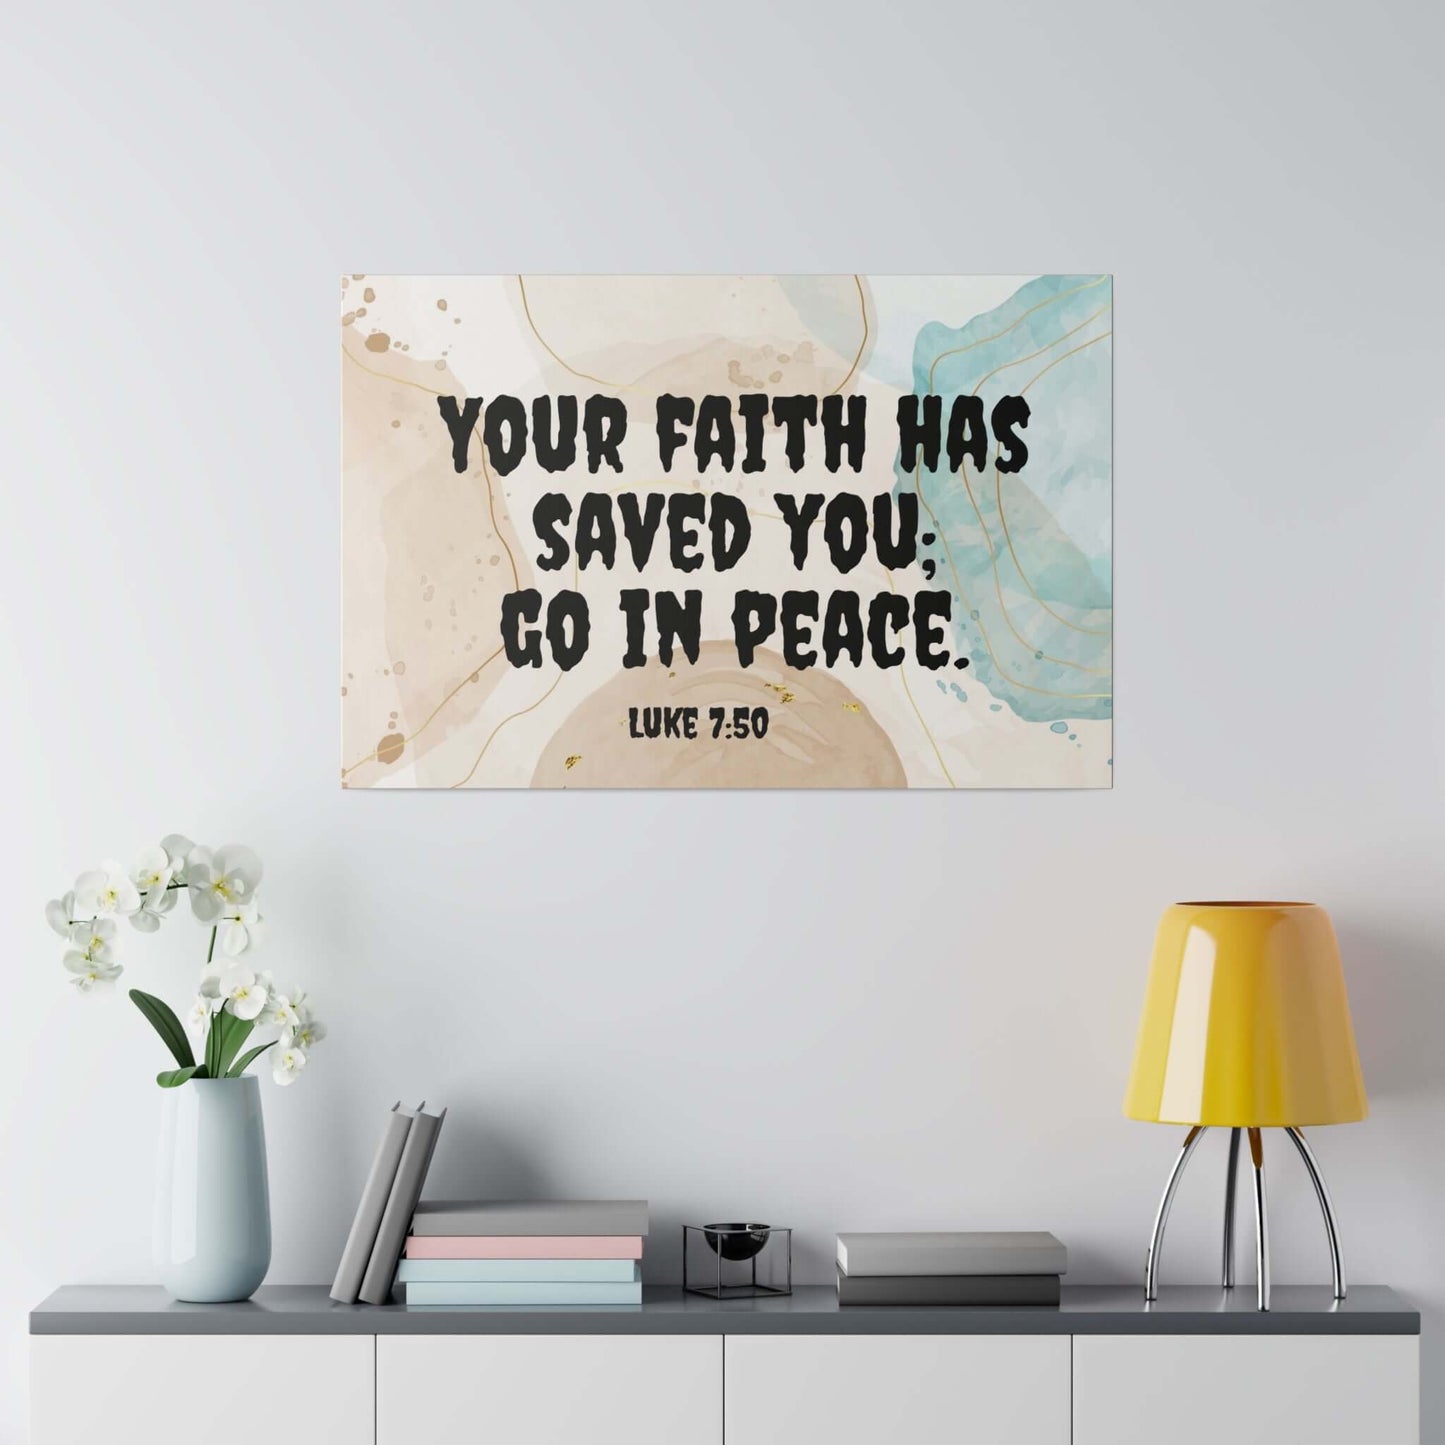 Abstract Canvas Wall Art with Luke 7:50 - Eco-Friendly and Durable | Art & Wall Decor,Canvas,Decor,Eco-friendly,Hanging Hardware,Holiday Picks,Home & Living,Indoor,Matte,Seasonal Picks,Sustainable,Wall,Wood